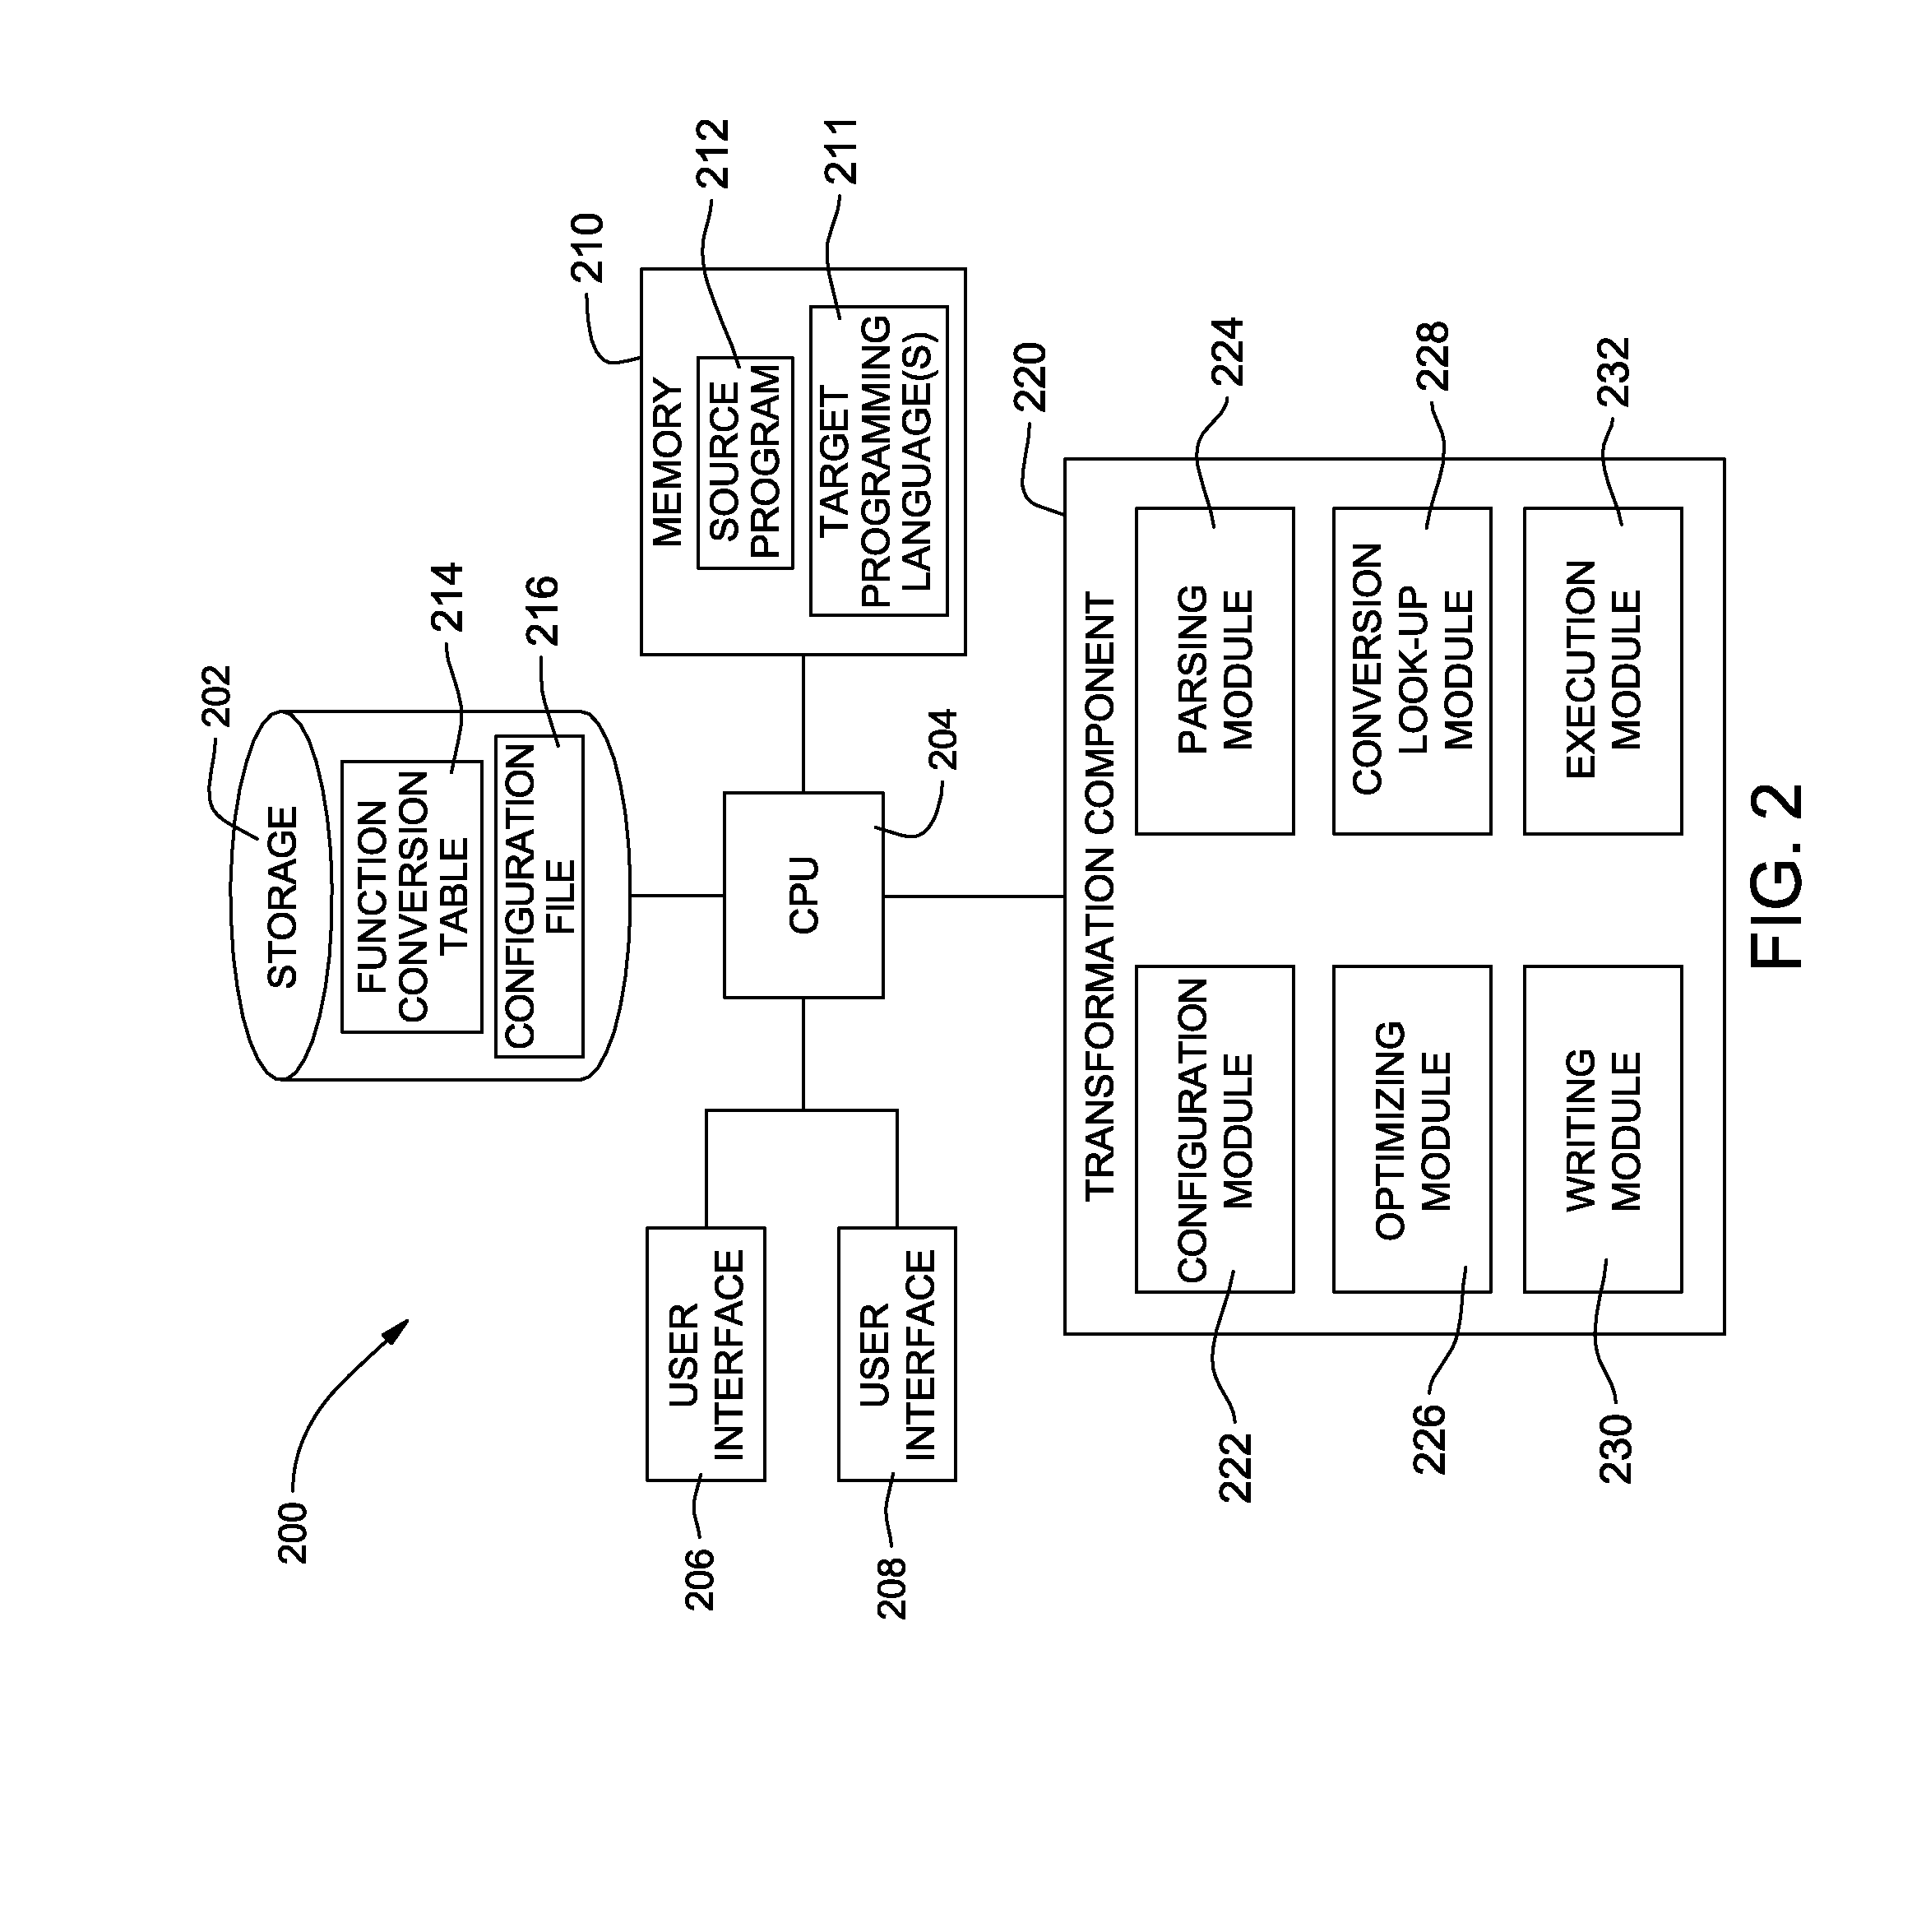 Method, system and program product for transforming a single language program into multiple language programs